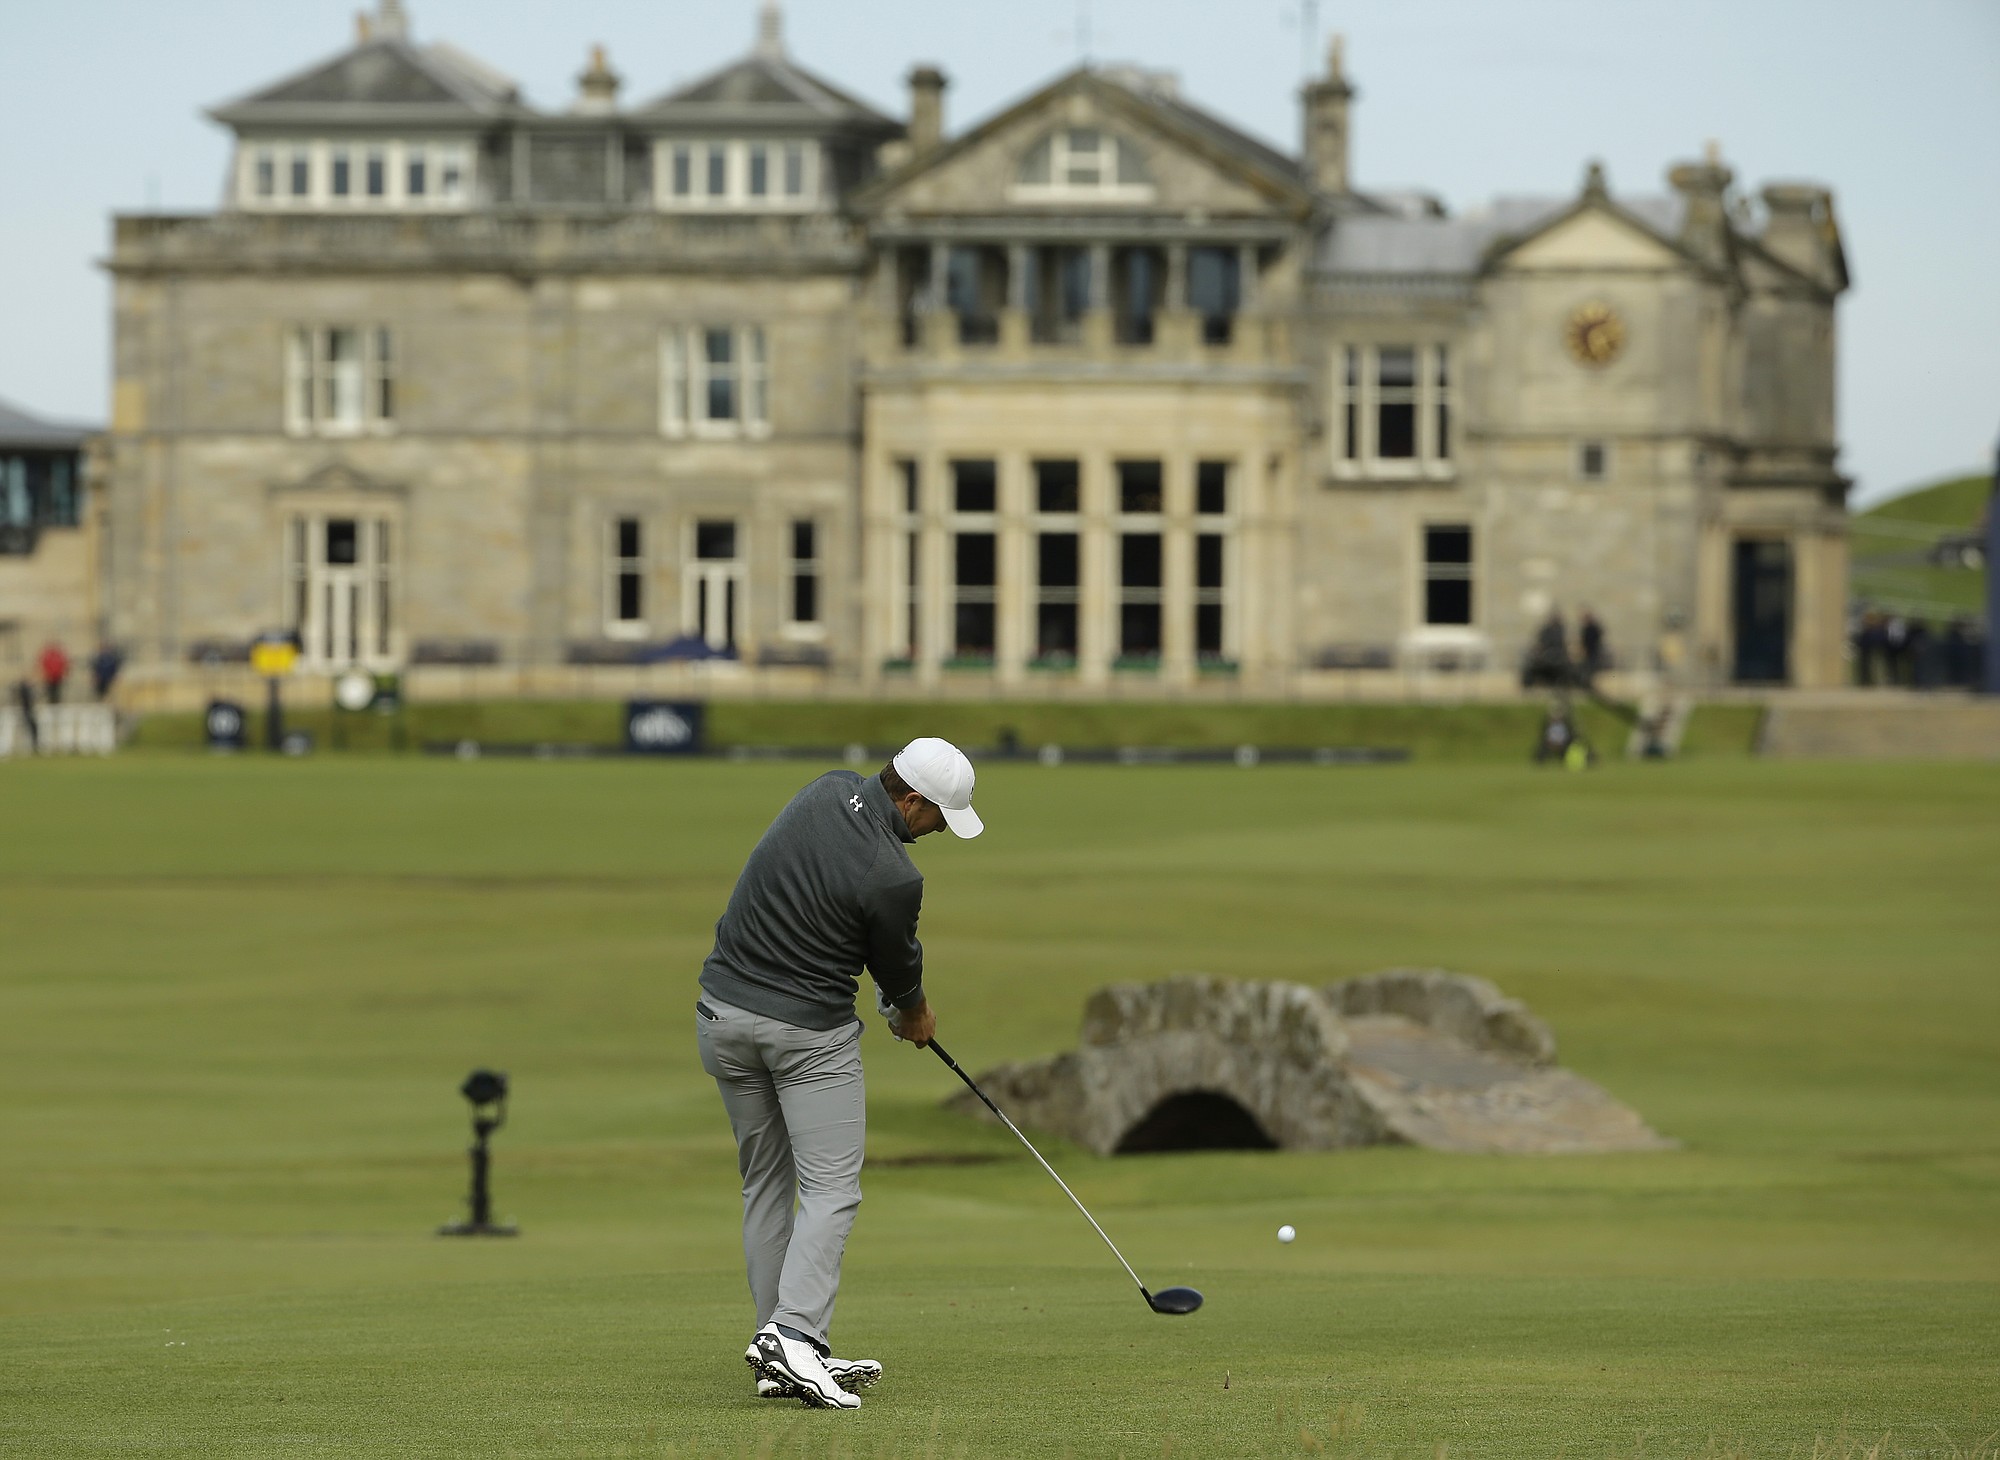 United States' Jordan Spieth drives the ball from the 18th tee during the third round of the British Open Golf Championship at the Old Course, St. Andrews, Scotland, on Sunday, July 19, 2015. (AP Photo/David J.